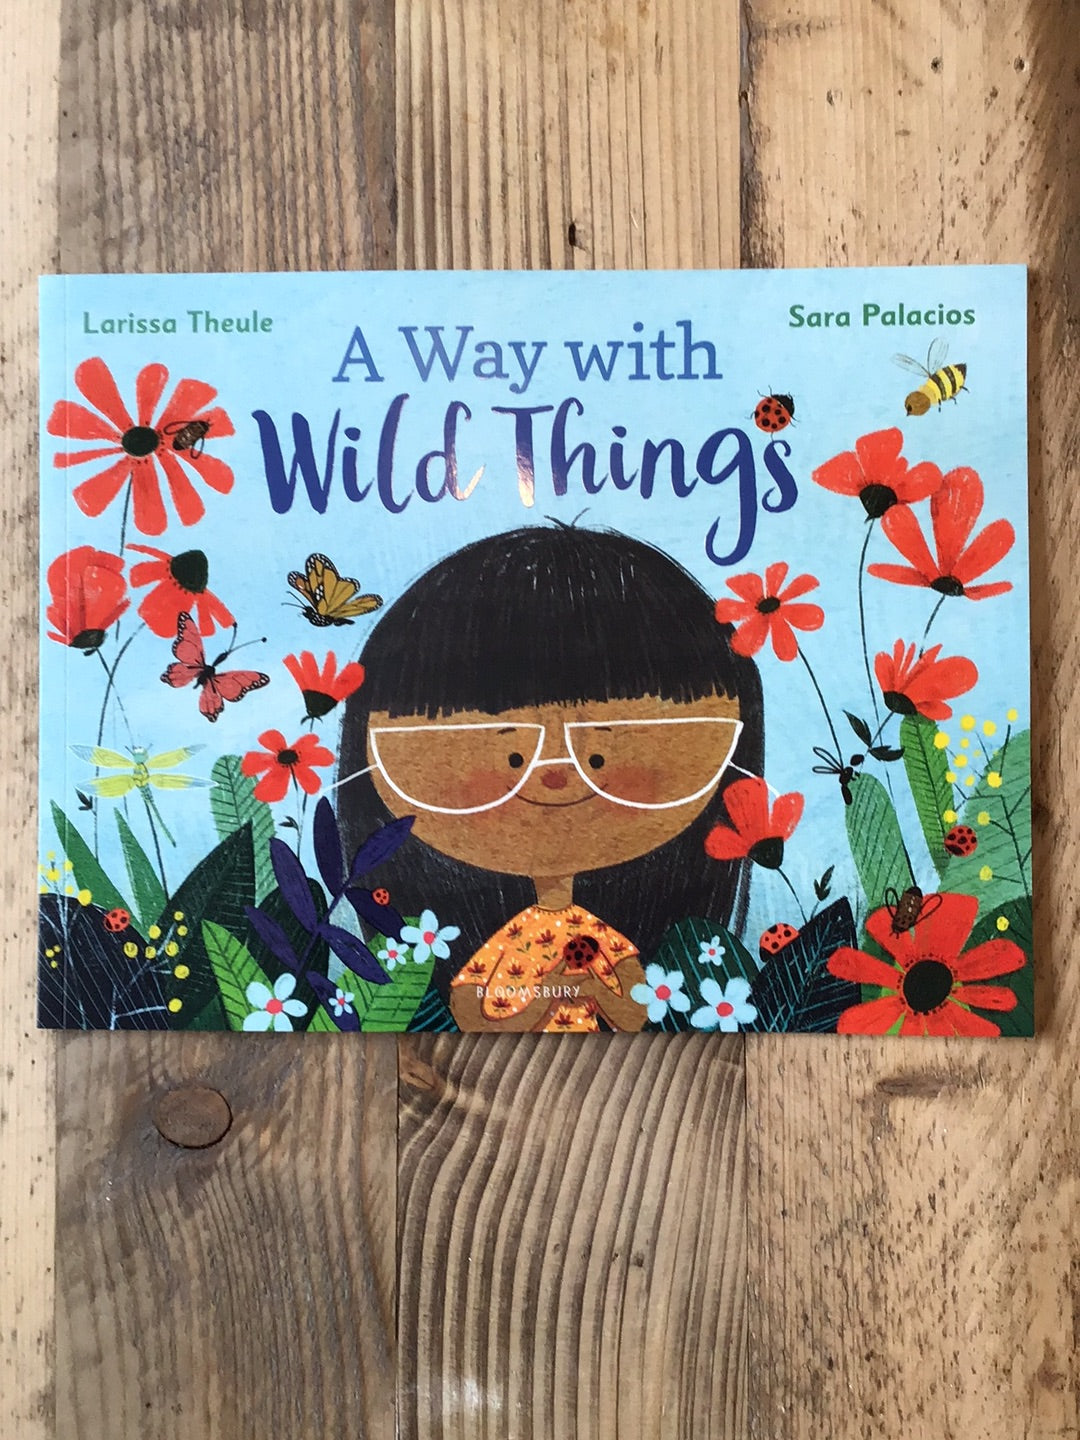 A Way with Wild Things